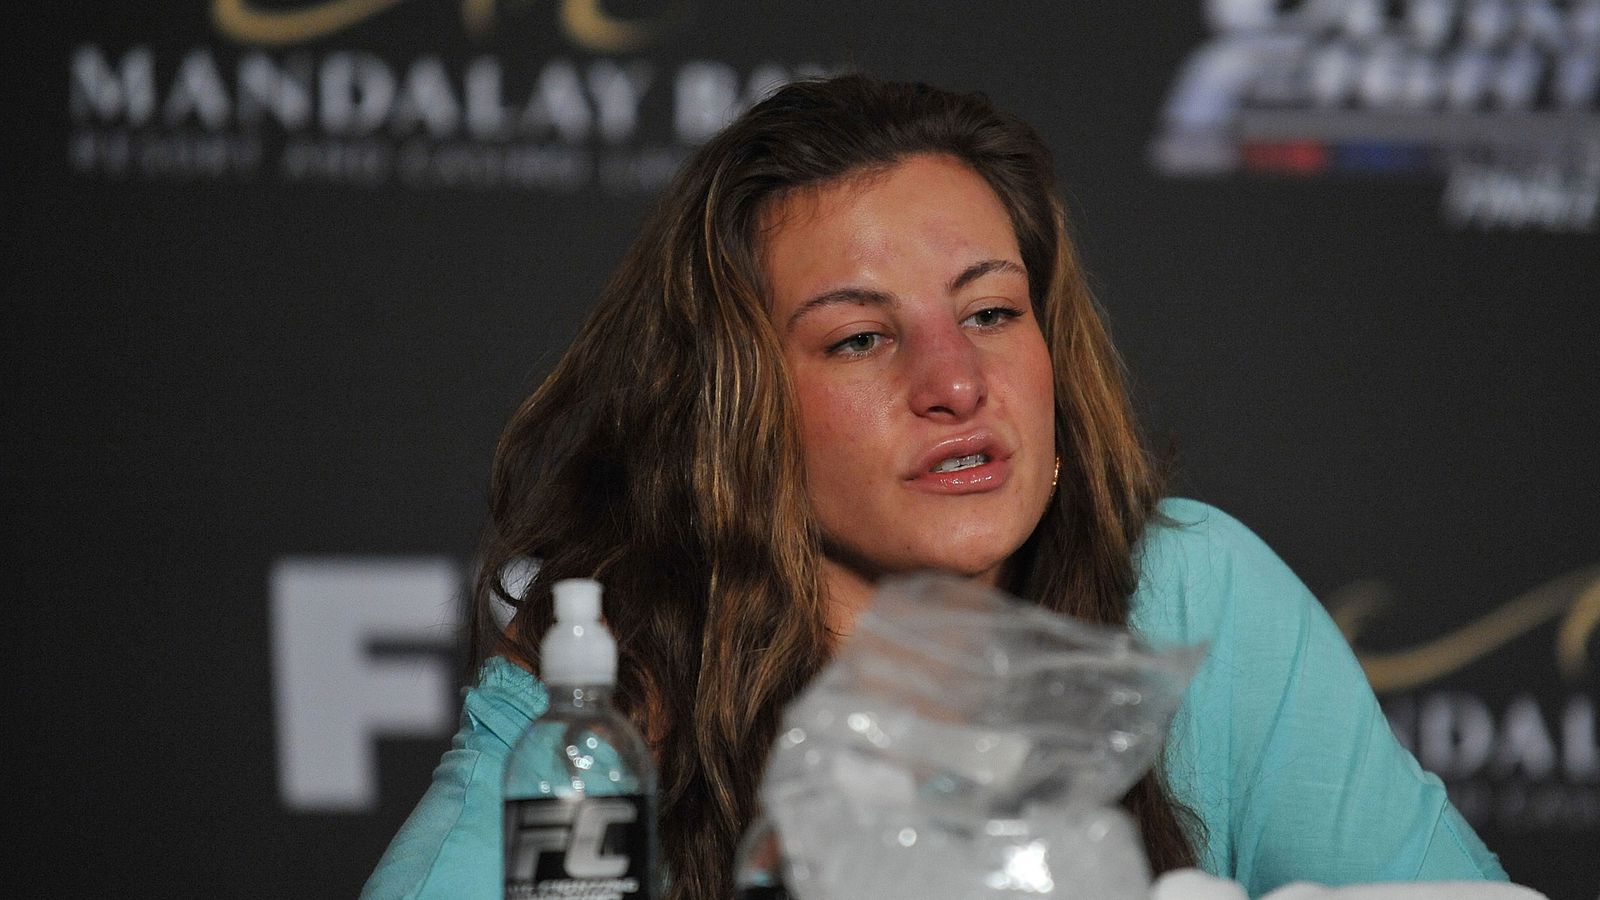 UFC on FOX 8: Miesha Tate previews upcoming fight against Liz Carmouche on ...